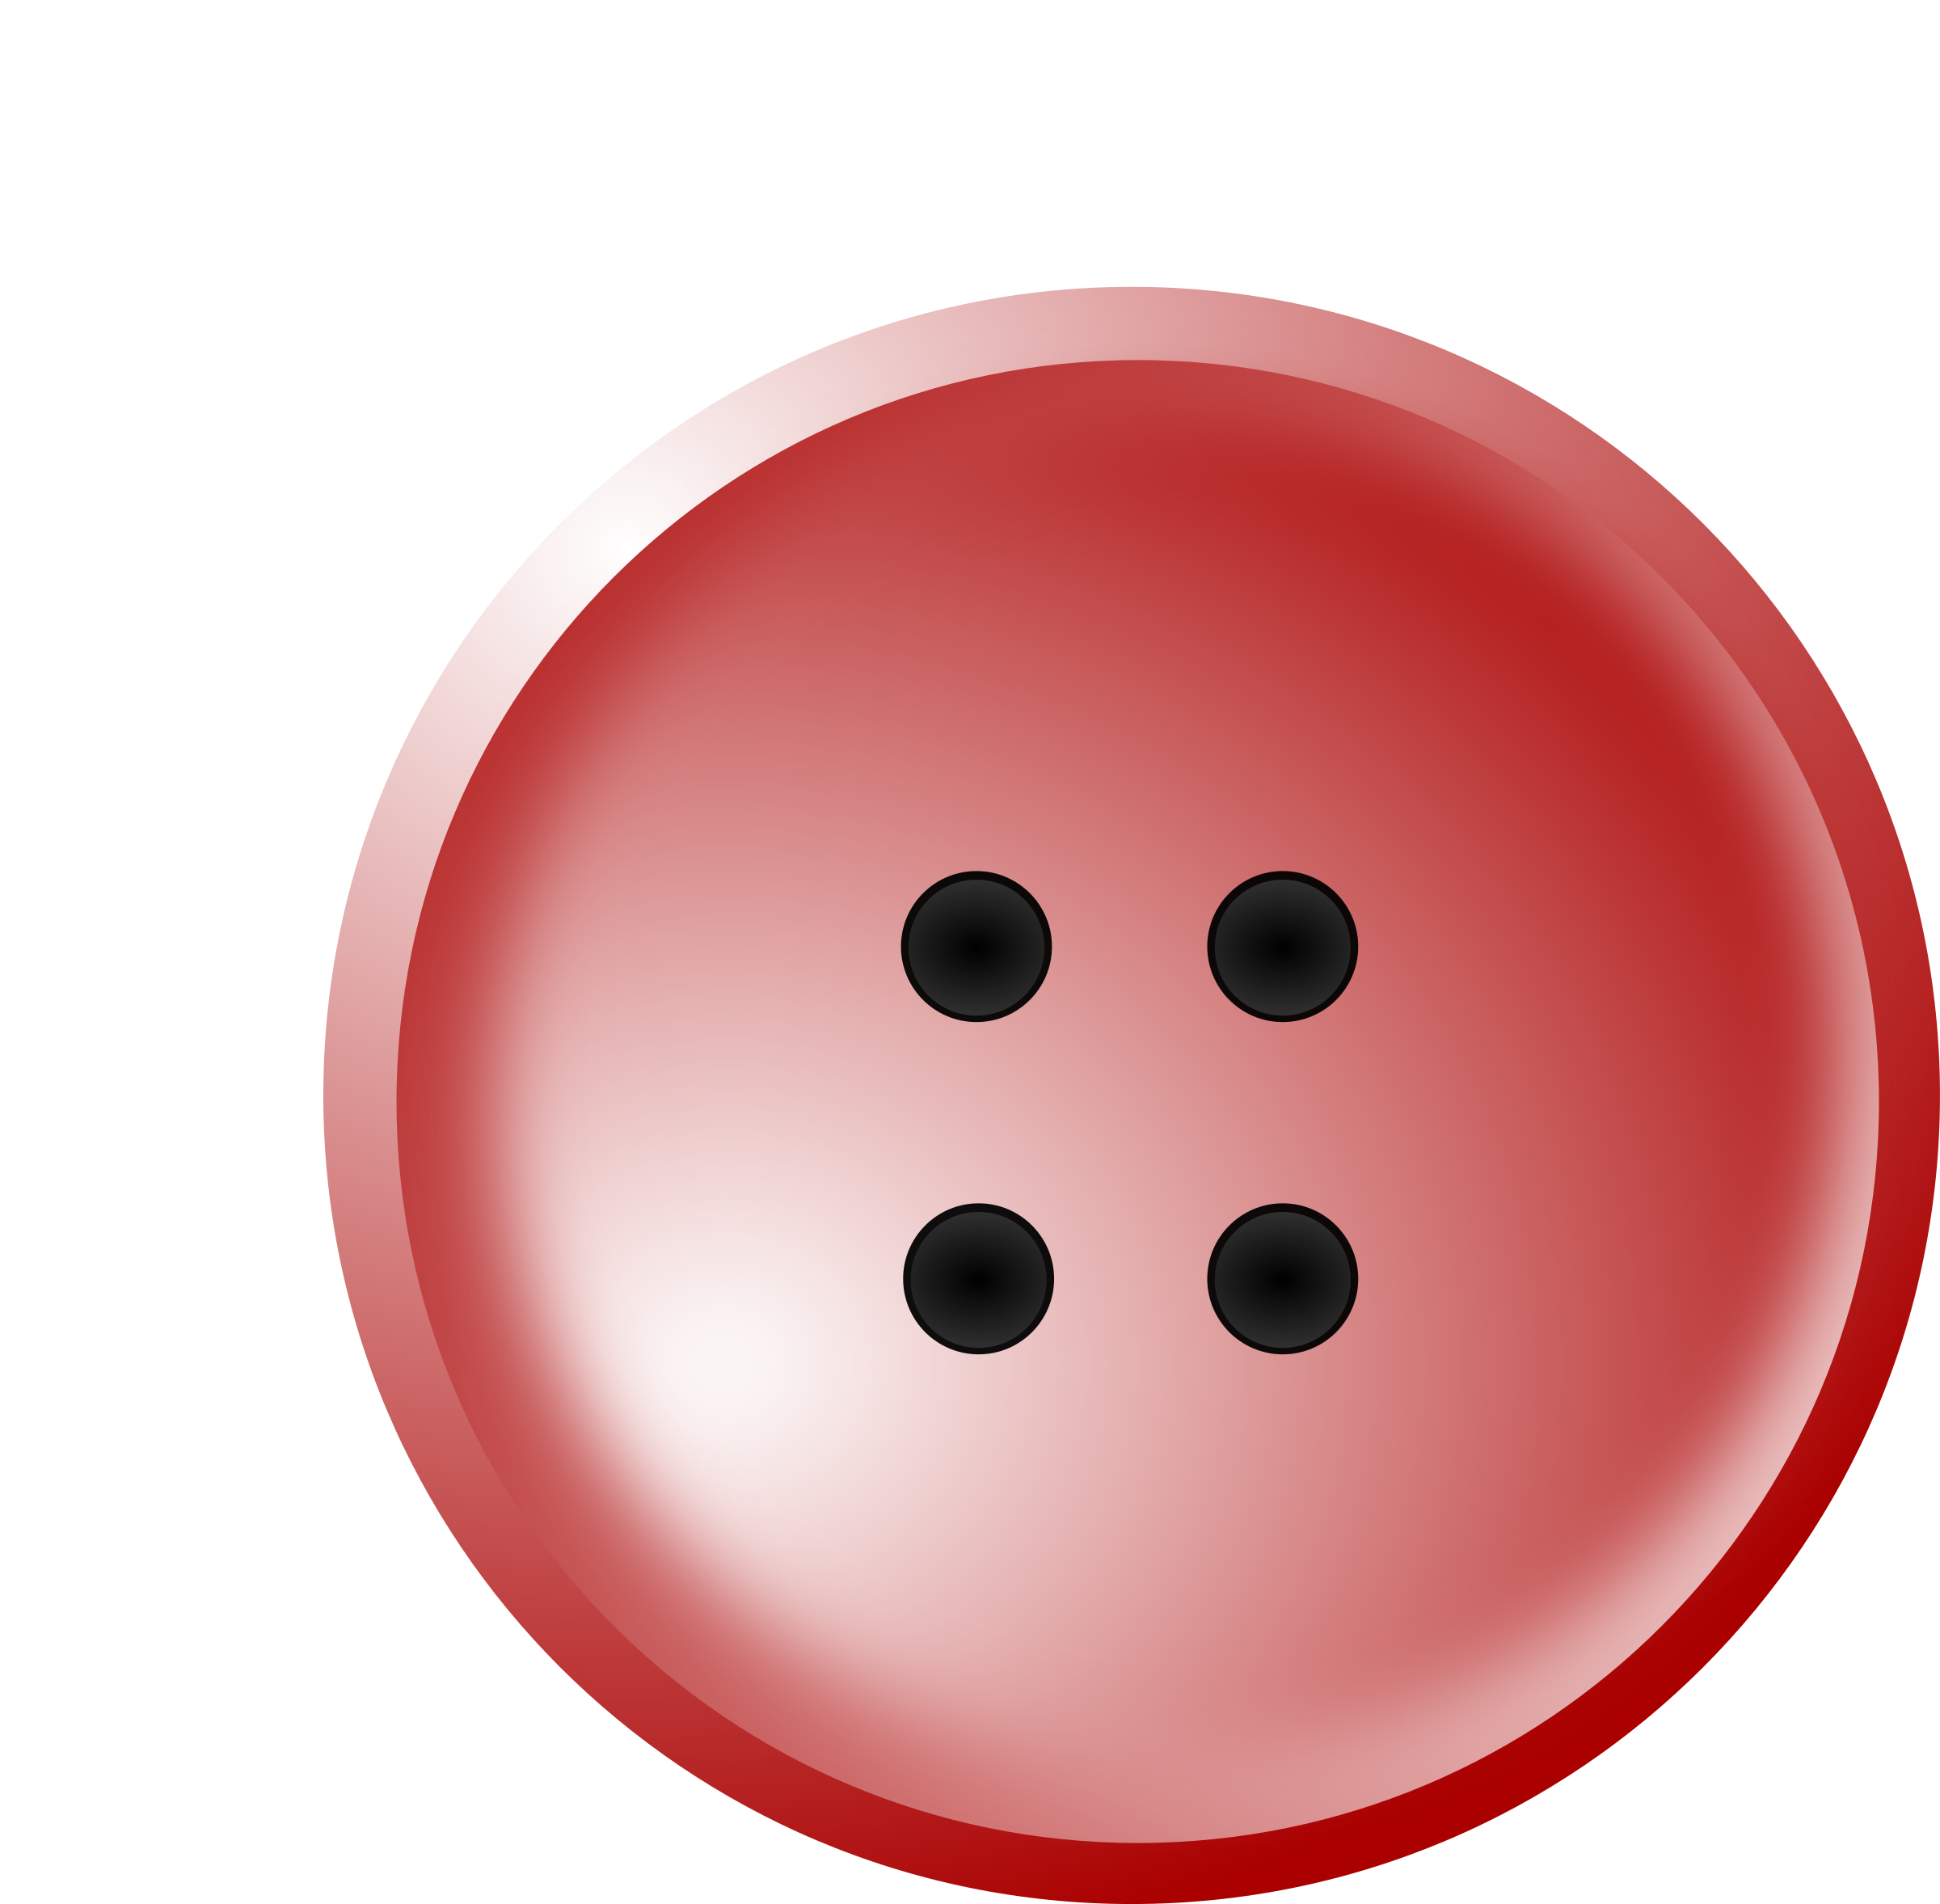 Doodle button big red Royalty Free Vector Image